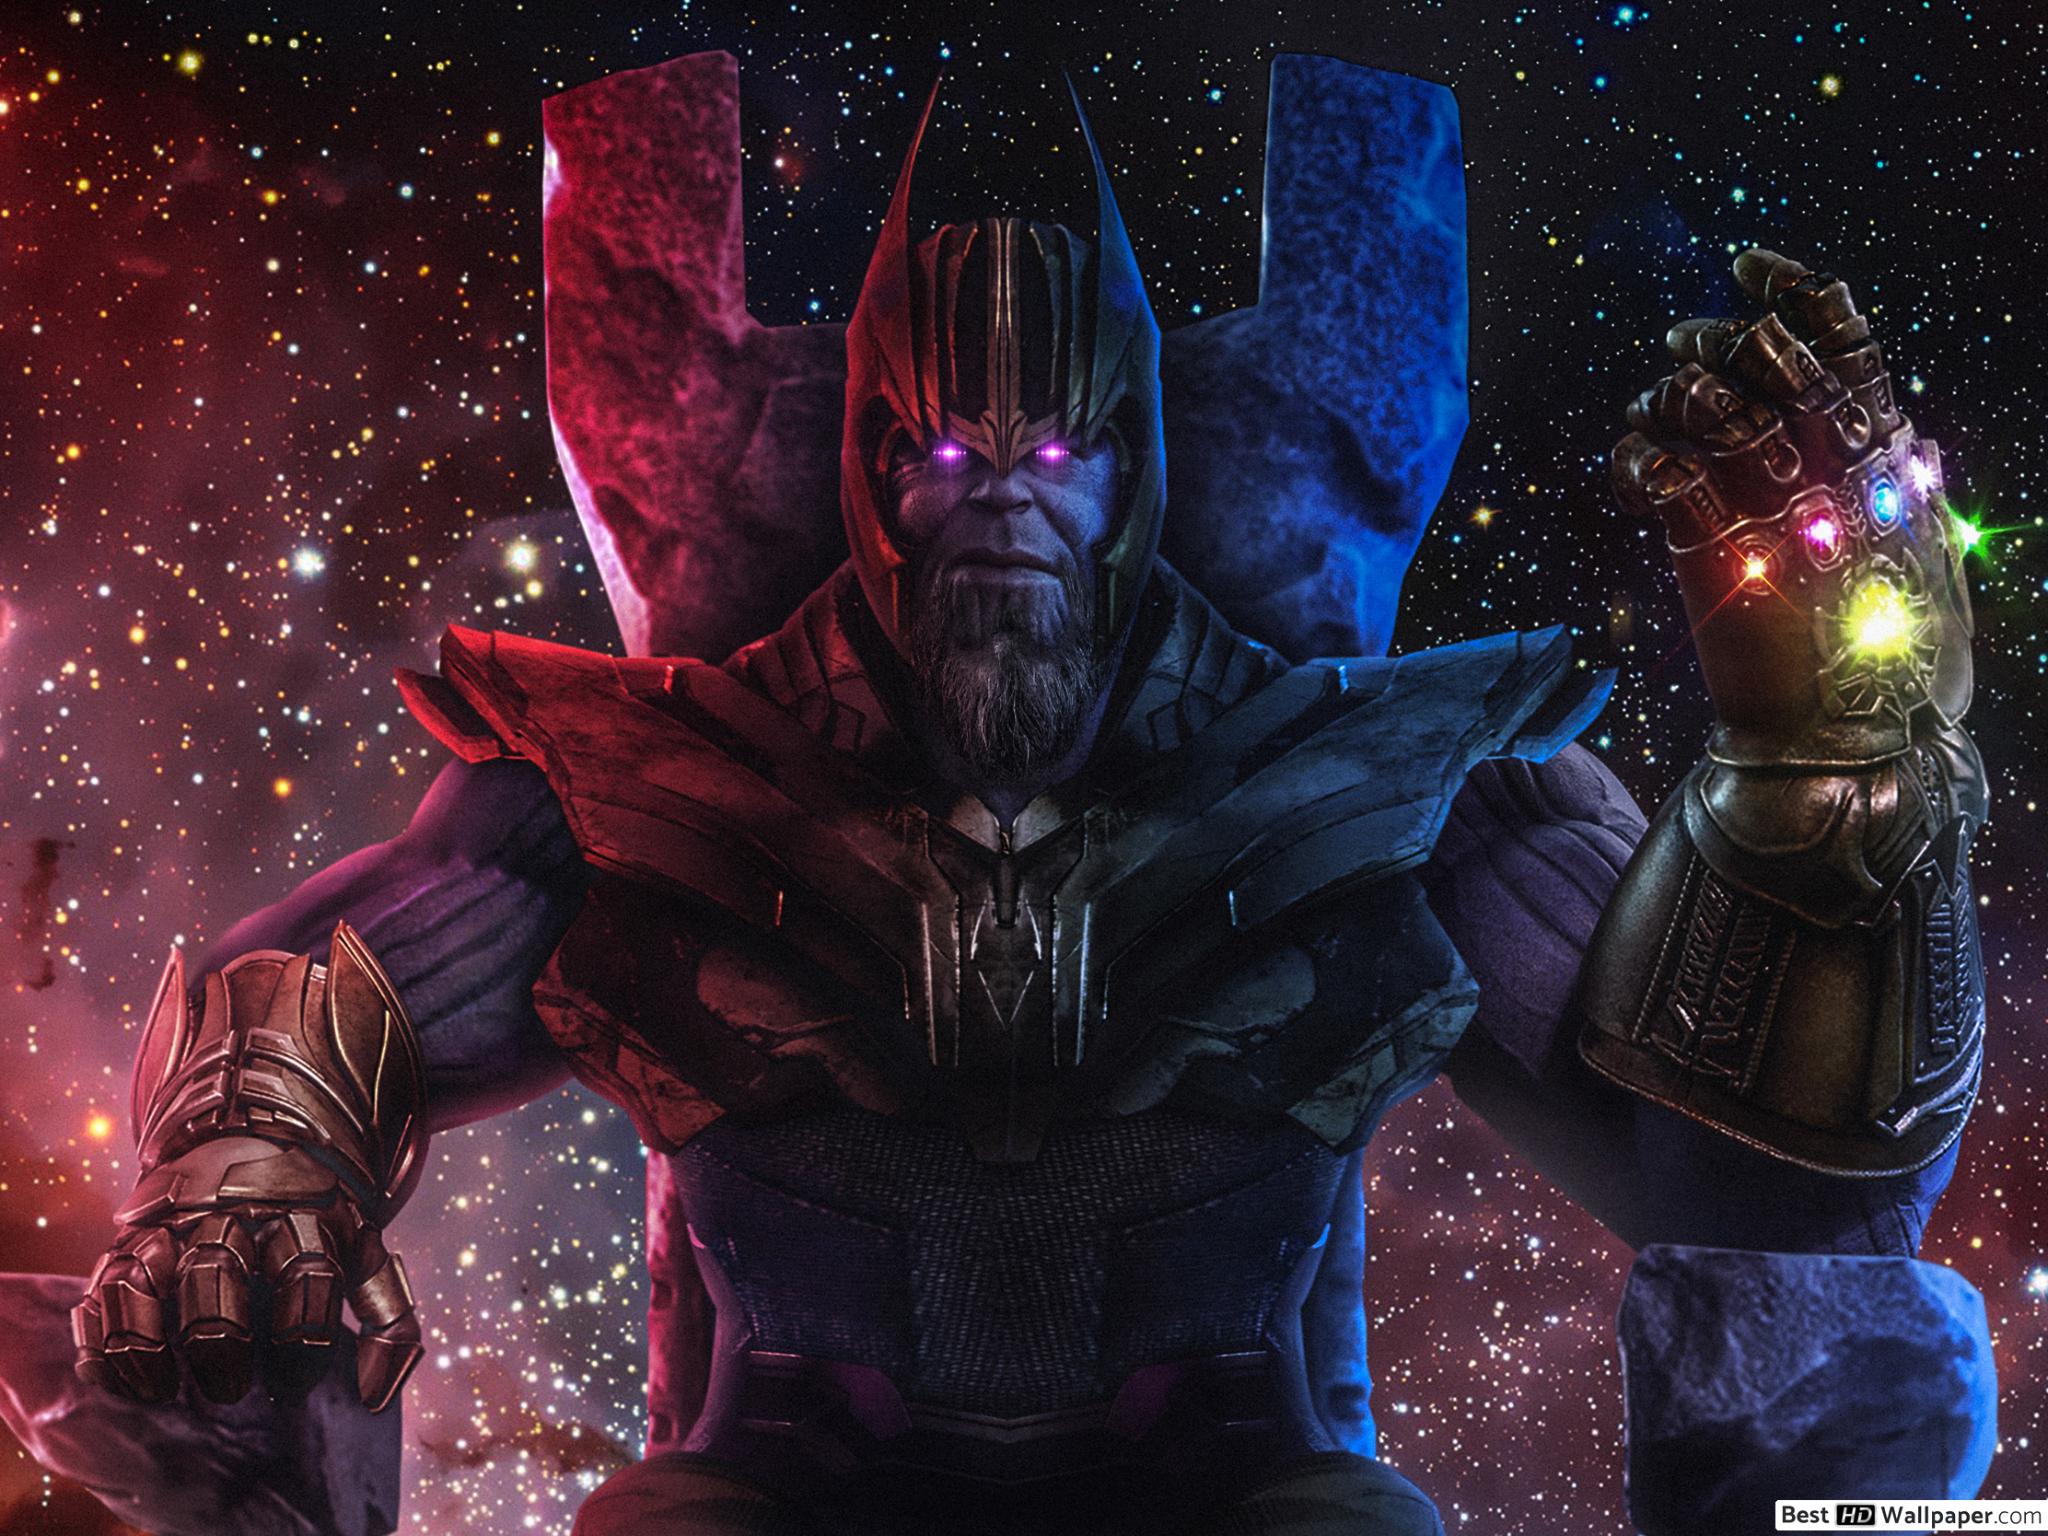 Avengers: Endgame with Infinity glove HD wallpaper download